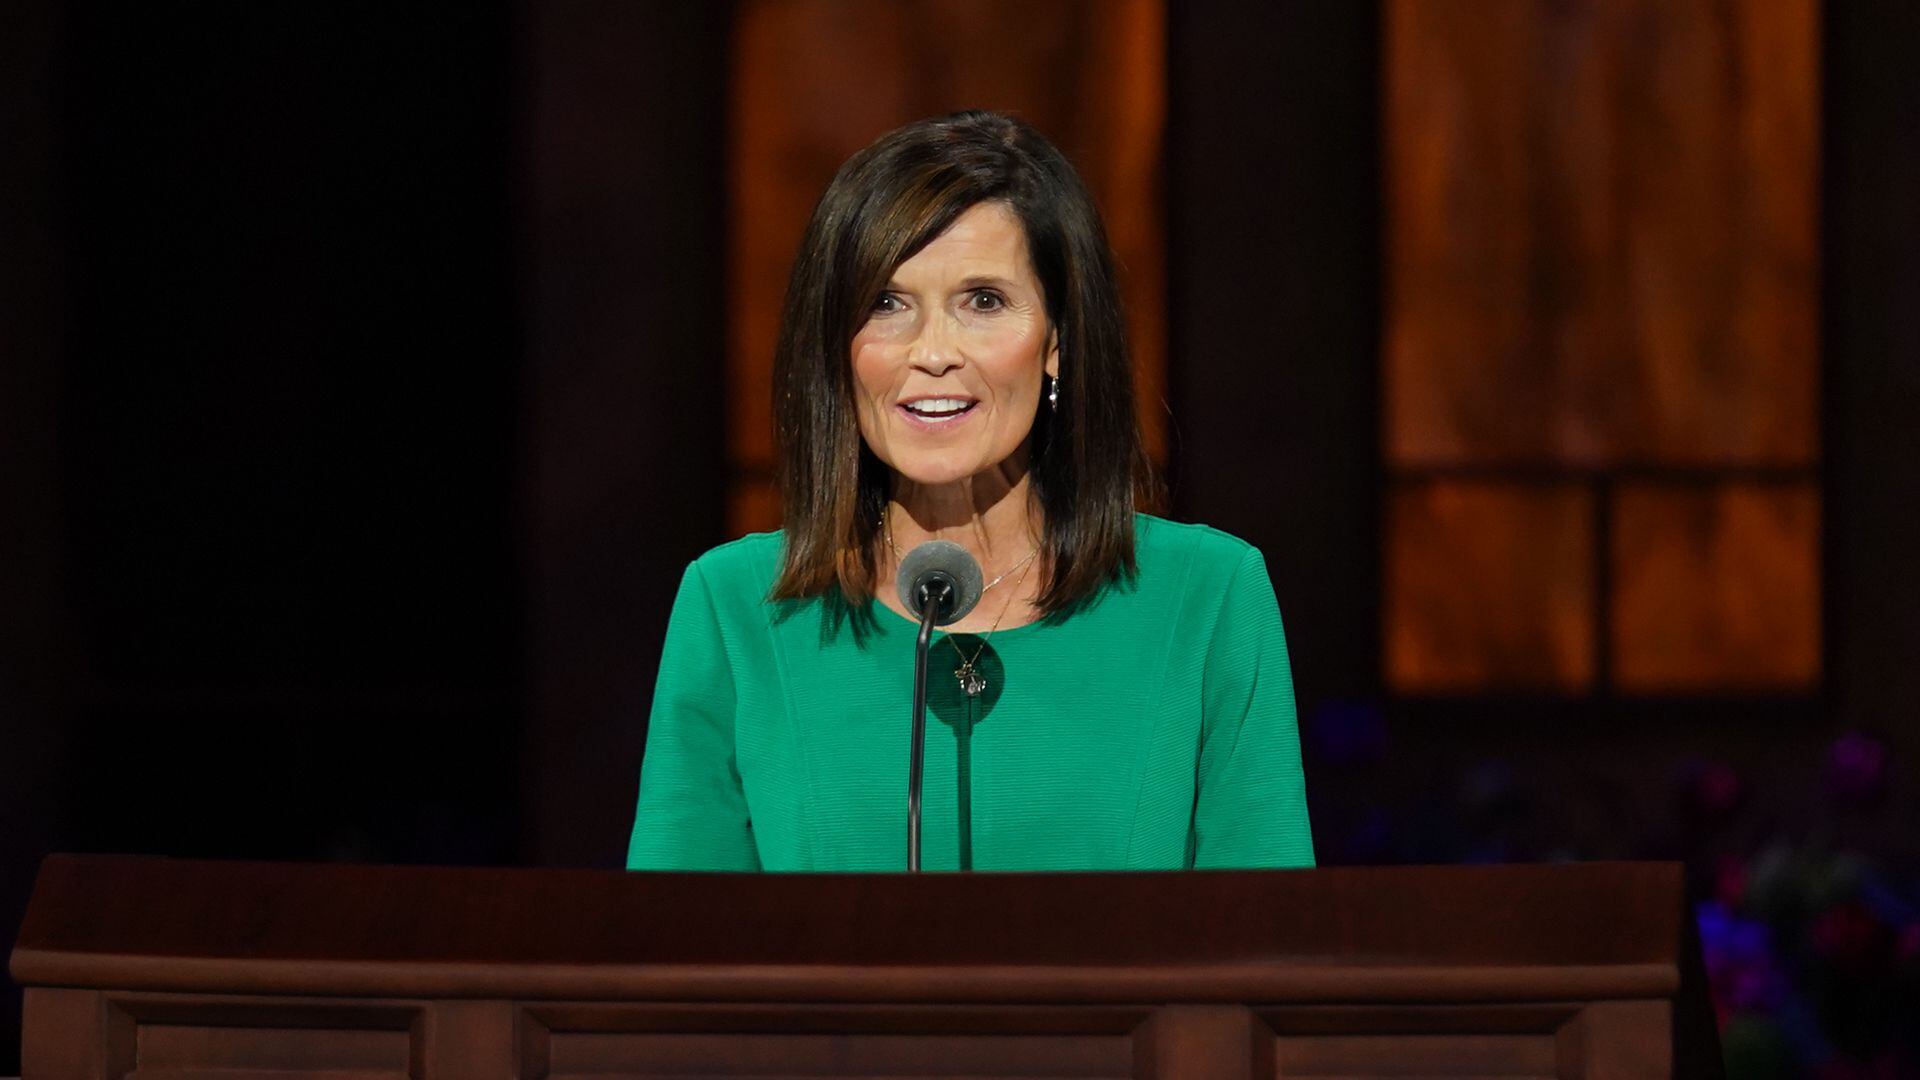 (Photo courtesy of The Church of Jesus Christ of Latter-day Saints) Rebecca M. Craven of the general Young Women presidency speaks at the women's session Saturday, Oct. 3, 2020.